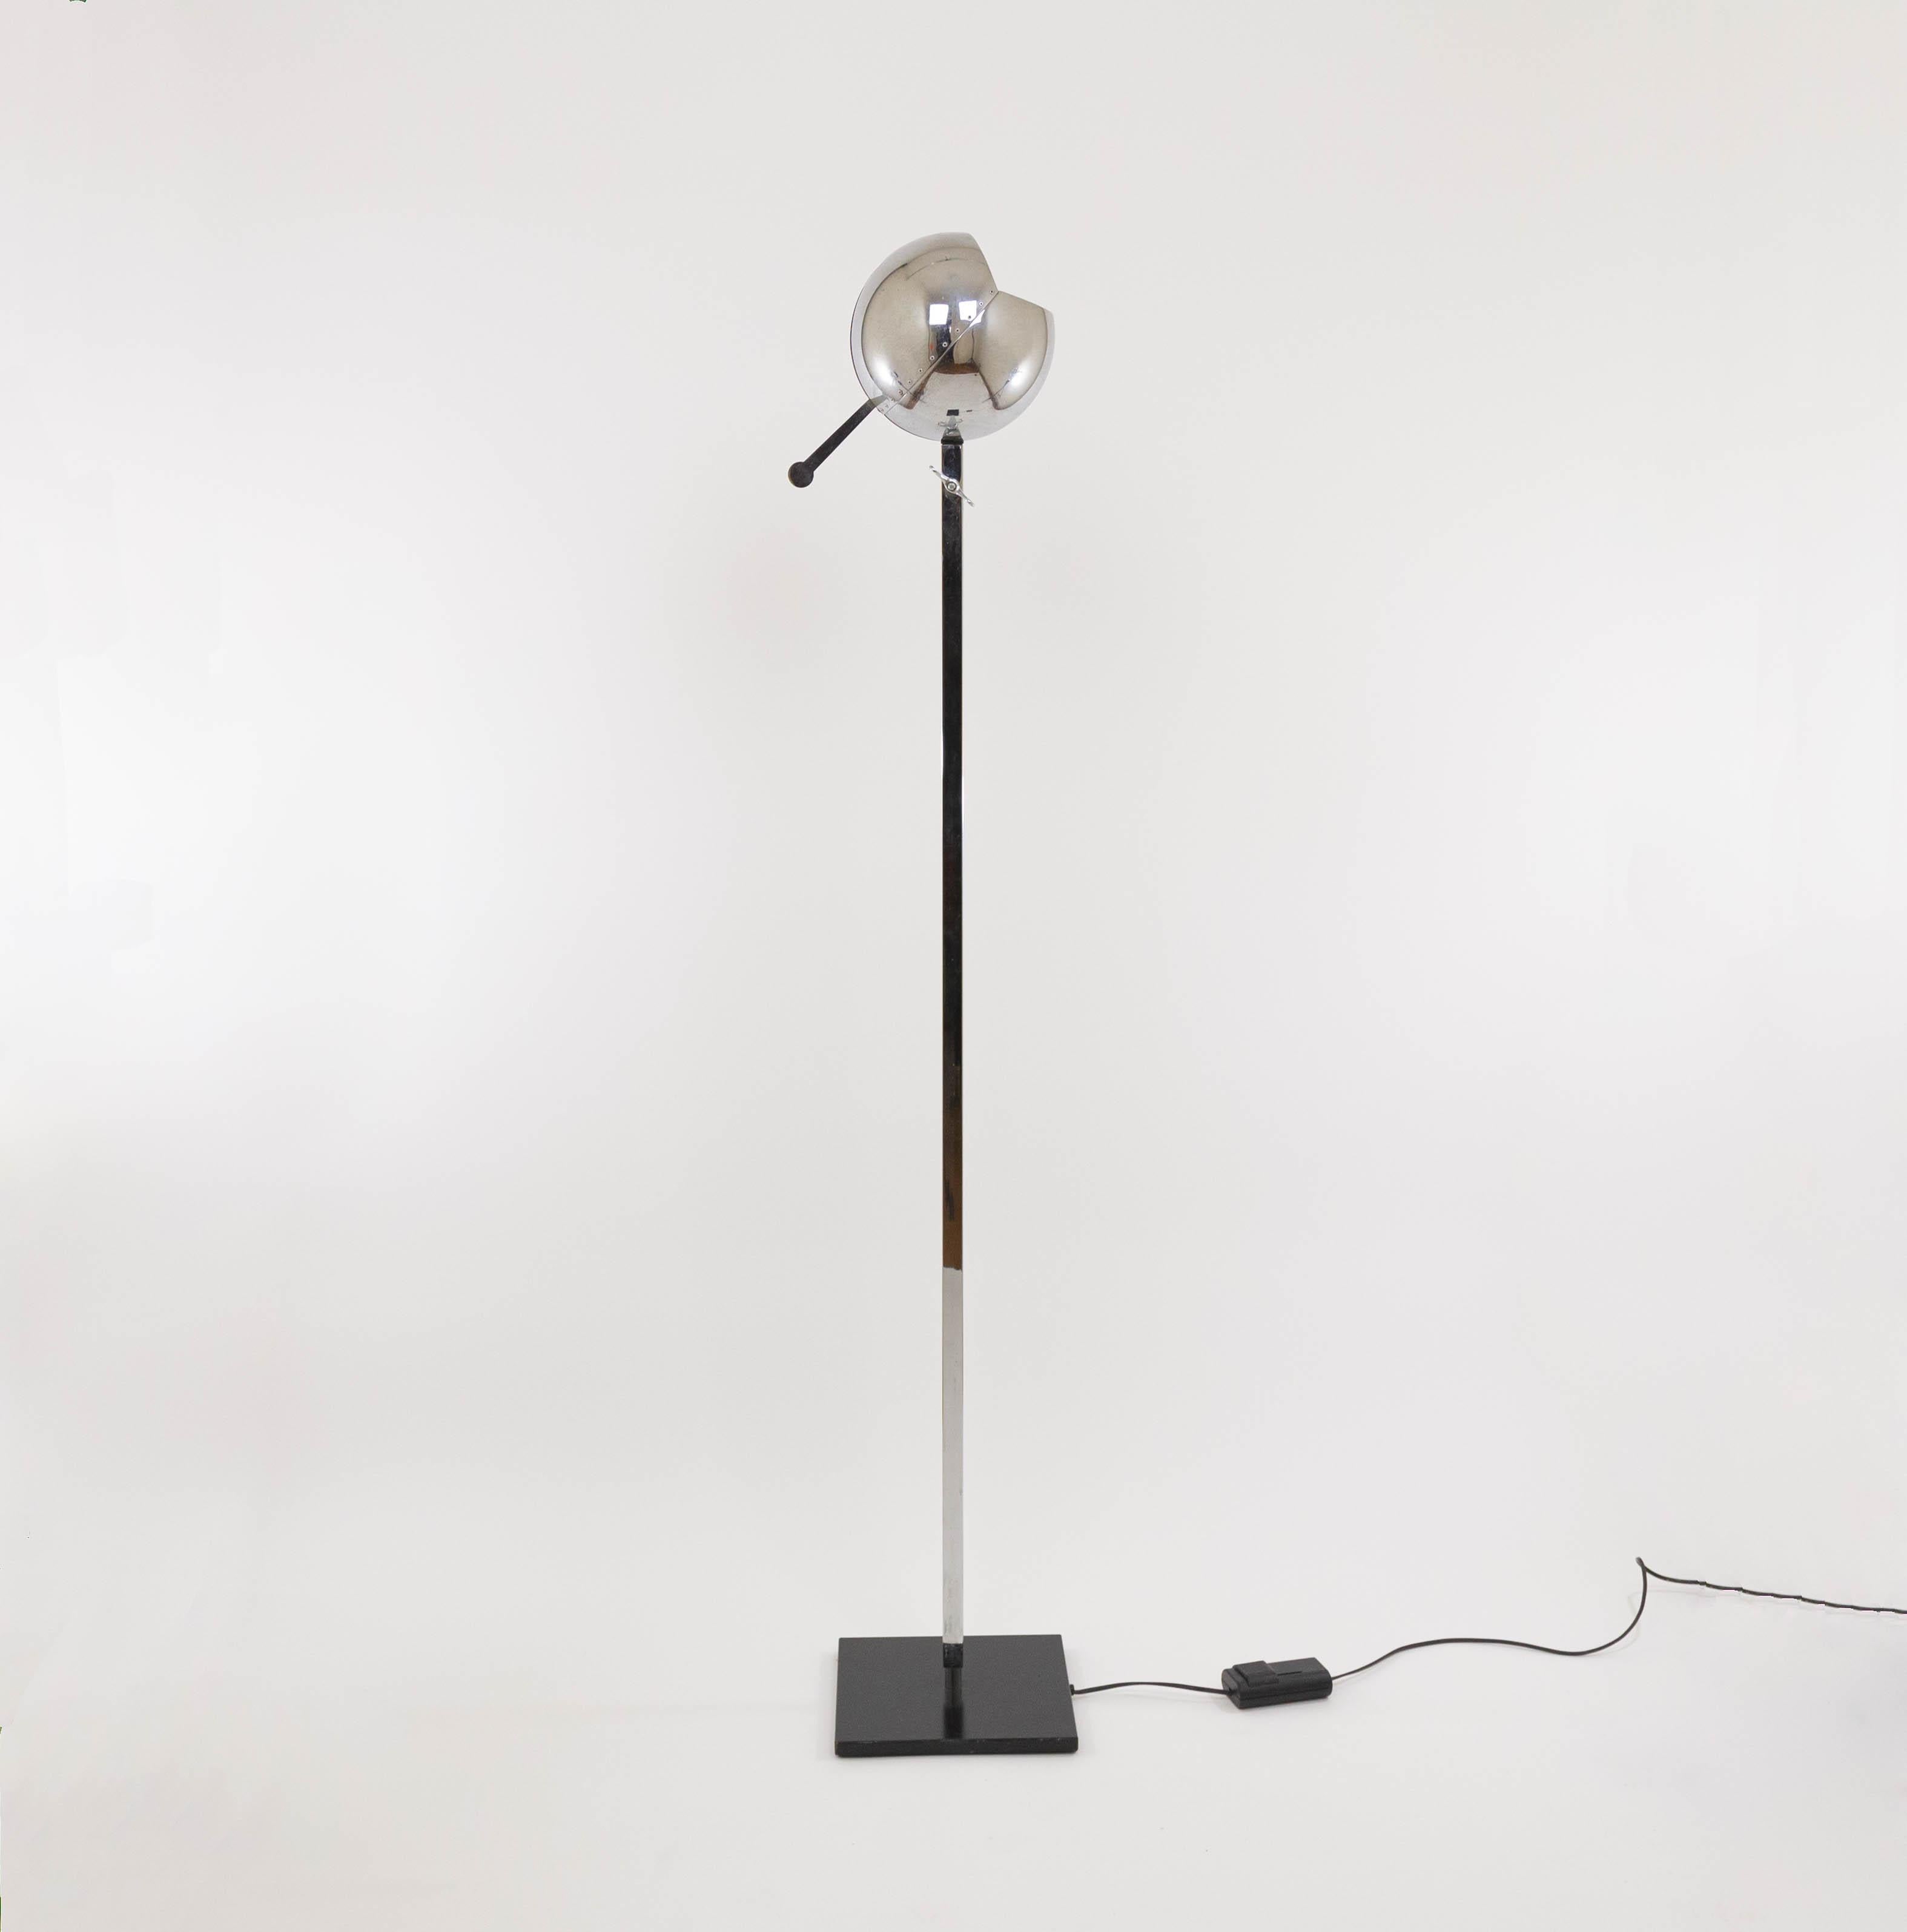 Fire Ball floor lamp designed by Carlo Forcolini and manufactured by Artemide for Sidecar.

The lamp has a flat square metal base and a thin, in height-adjustable shaft on which the spherical chrome shade with decorative rivets rests.

The minimum